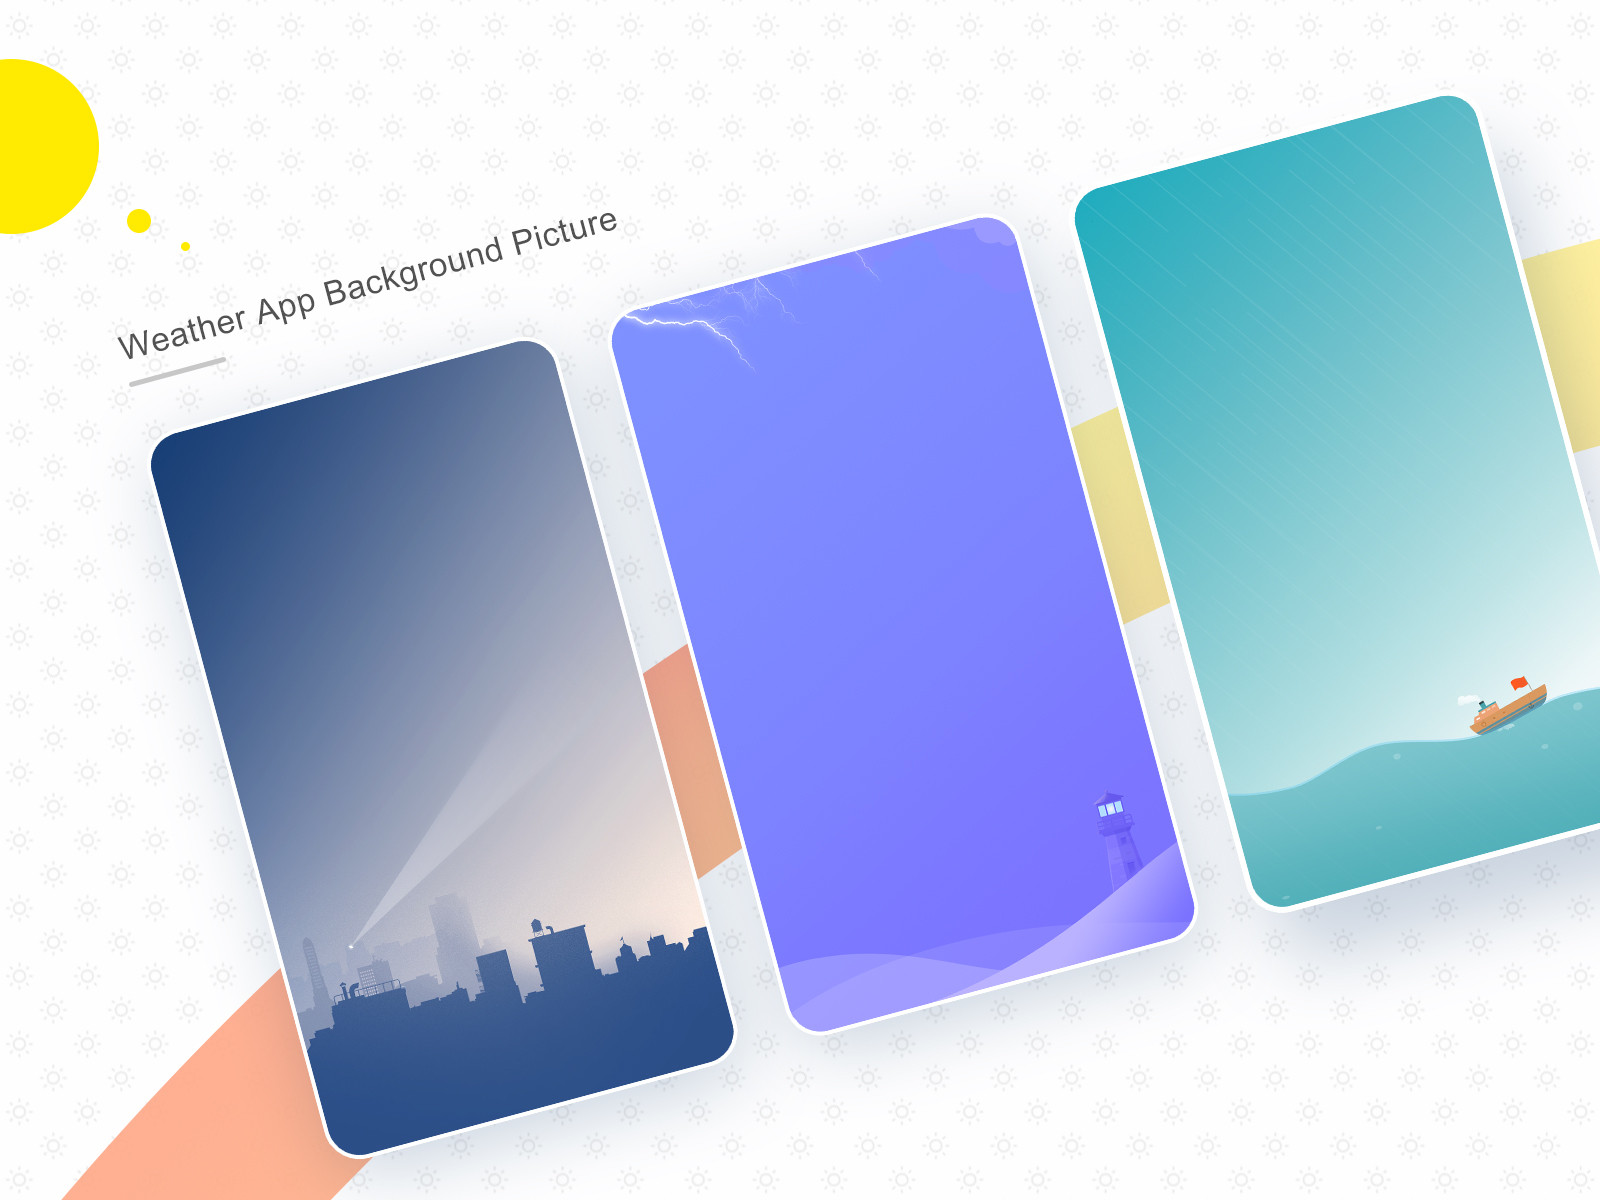 Bg pic for weather app by Penno on Dribbble